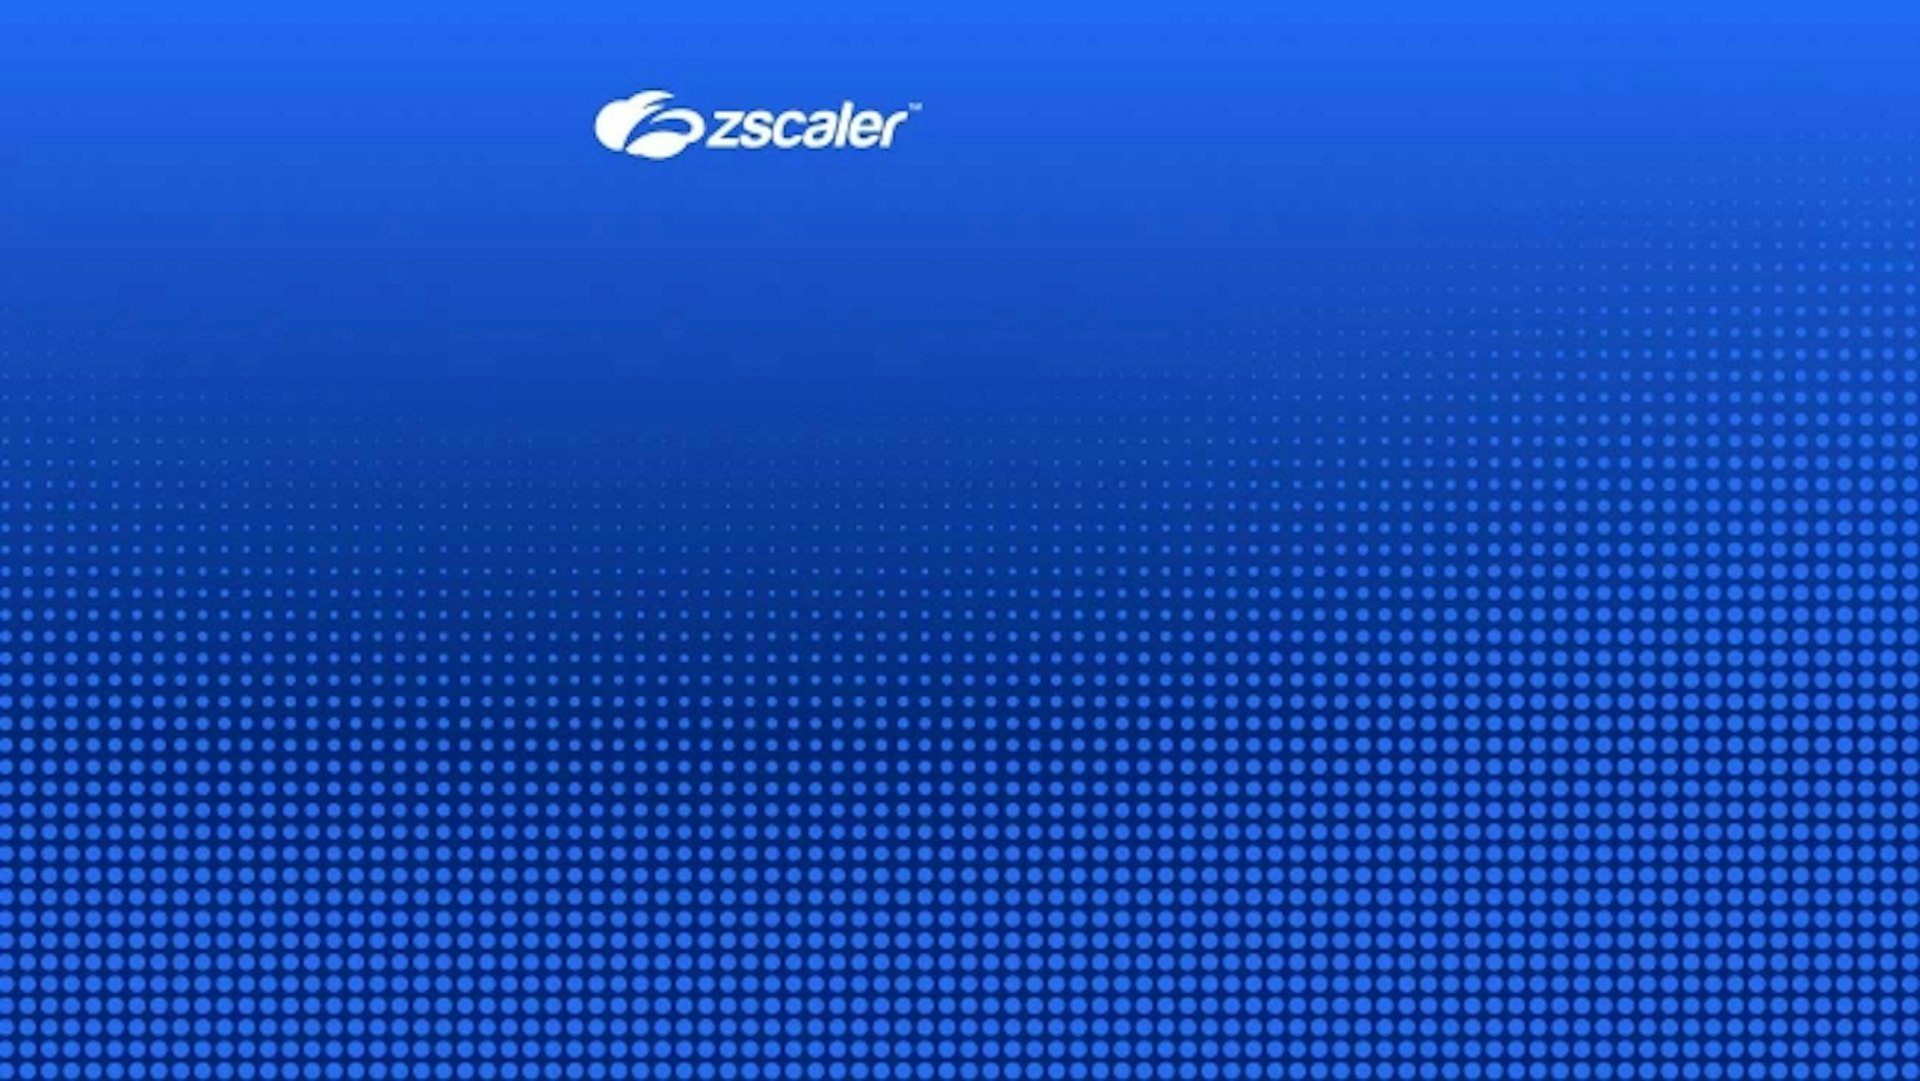 A true zero trust story: How AWS and Zscaler enabled secure work from anywhere overnight